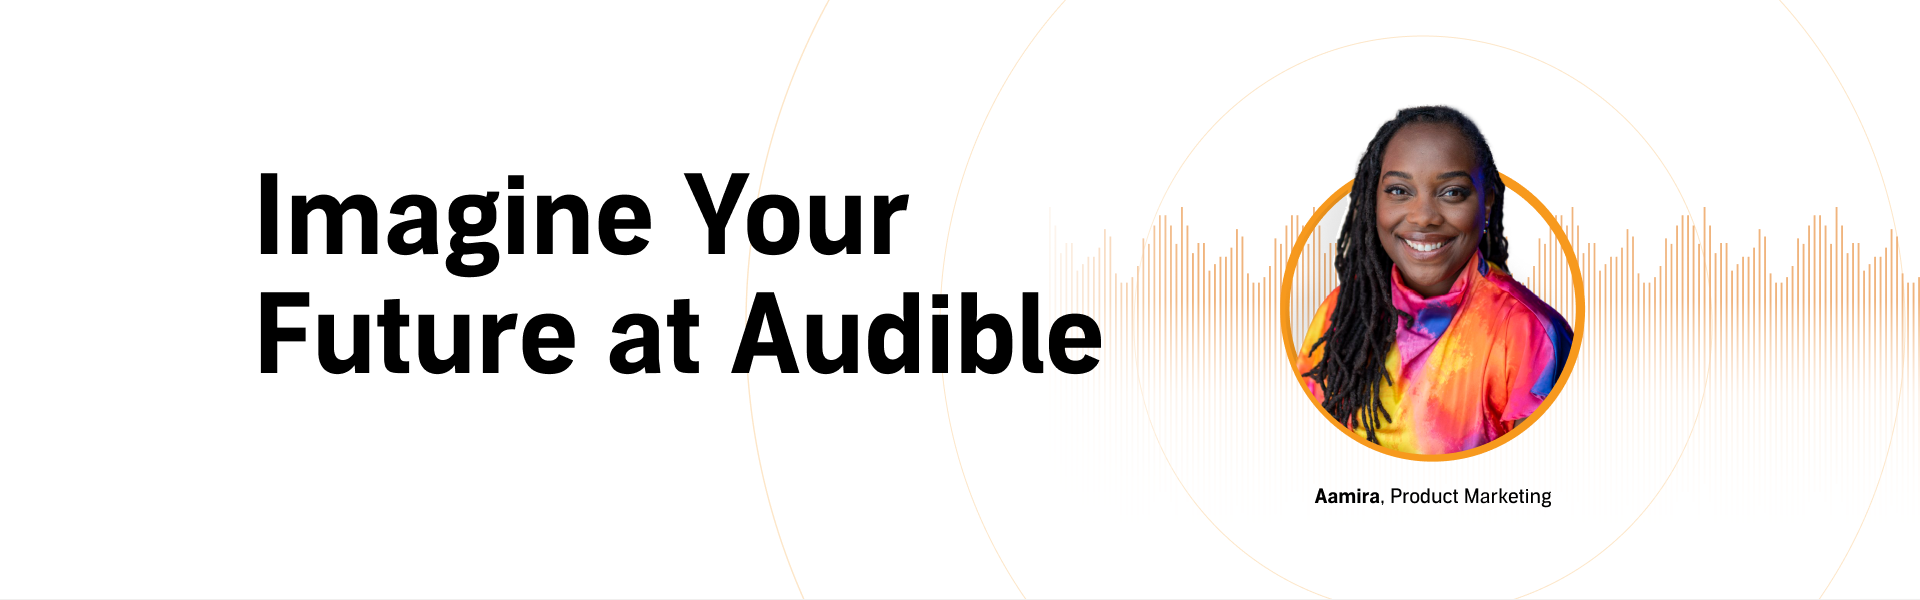 Imagine Your Future at Audible